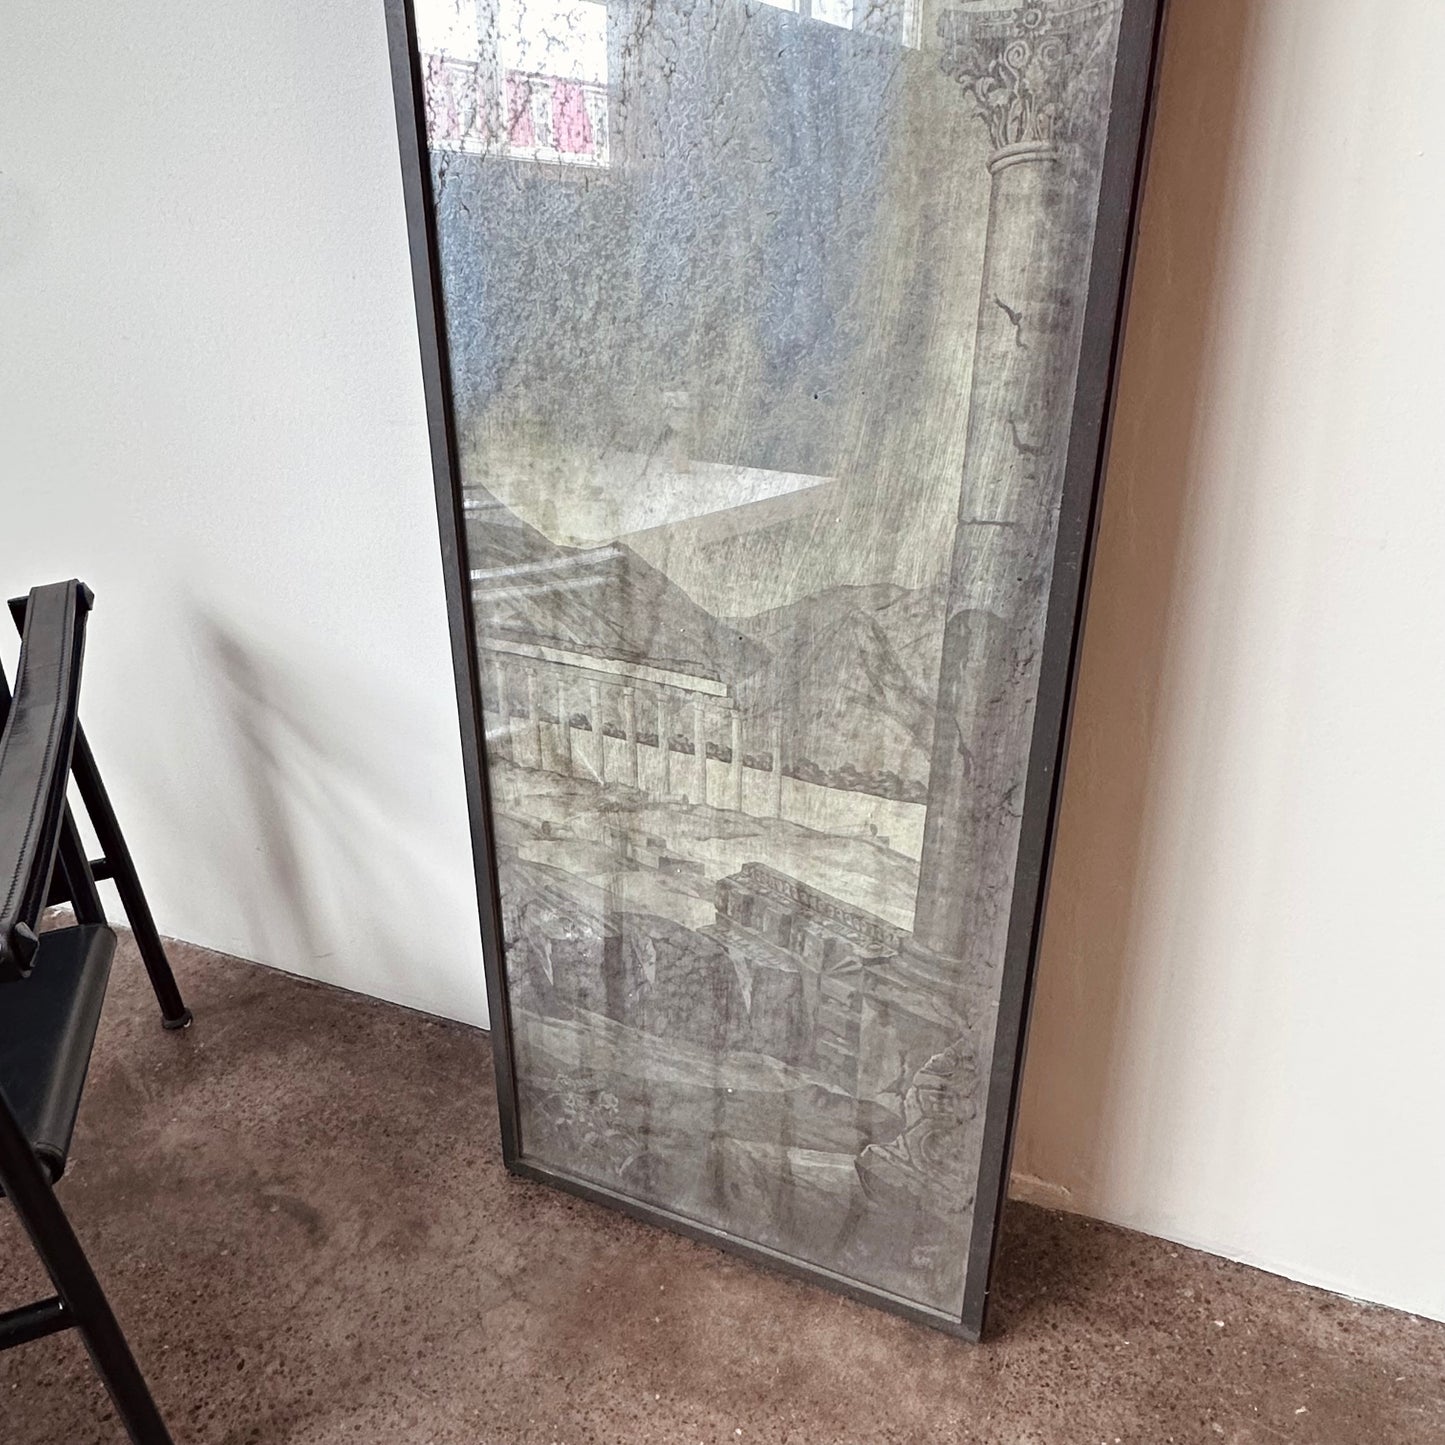 LONG ANTIQUED MIRROR WITH ROMANESQUE SCENE